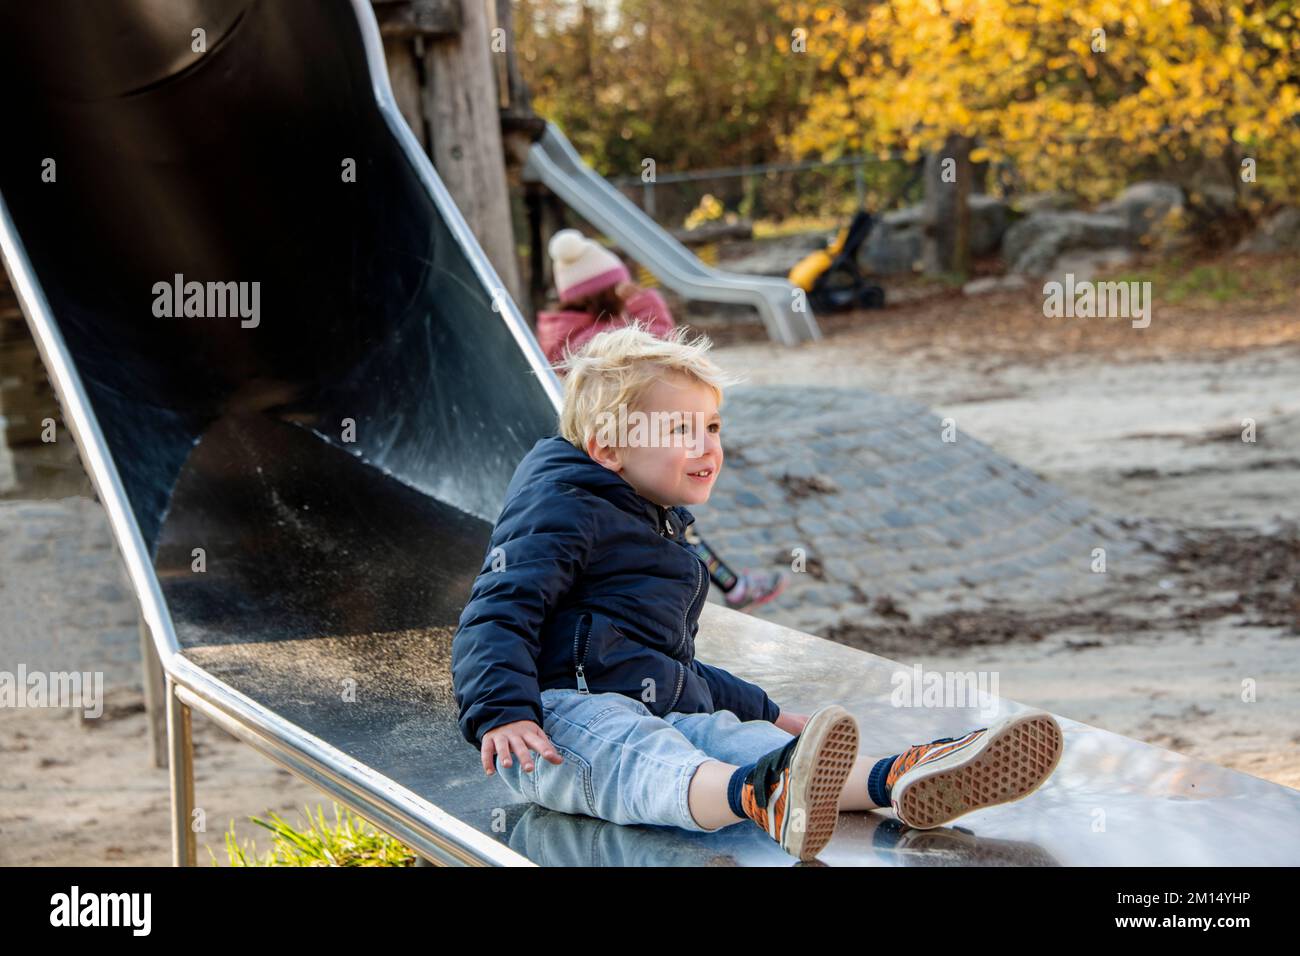 Near view of a young child at the playground on a sunny day Stock Photo